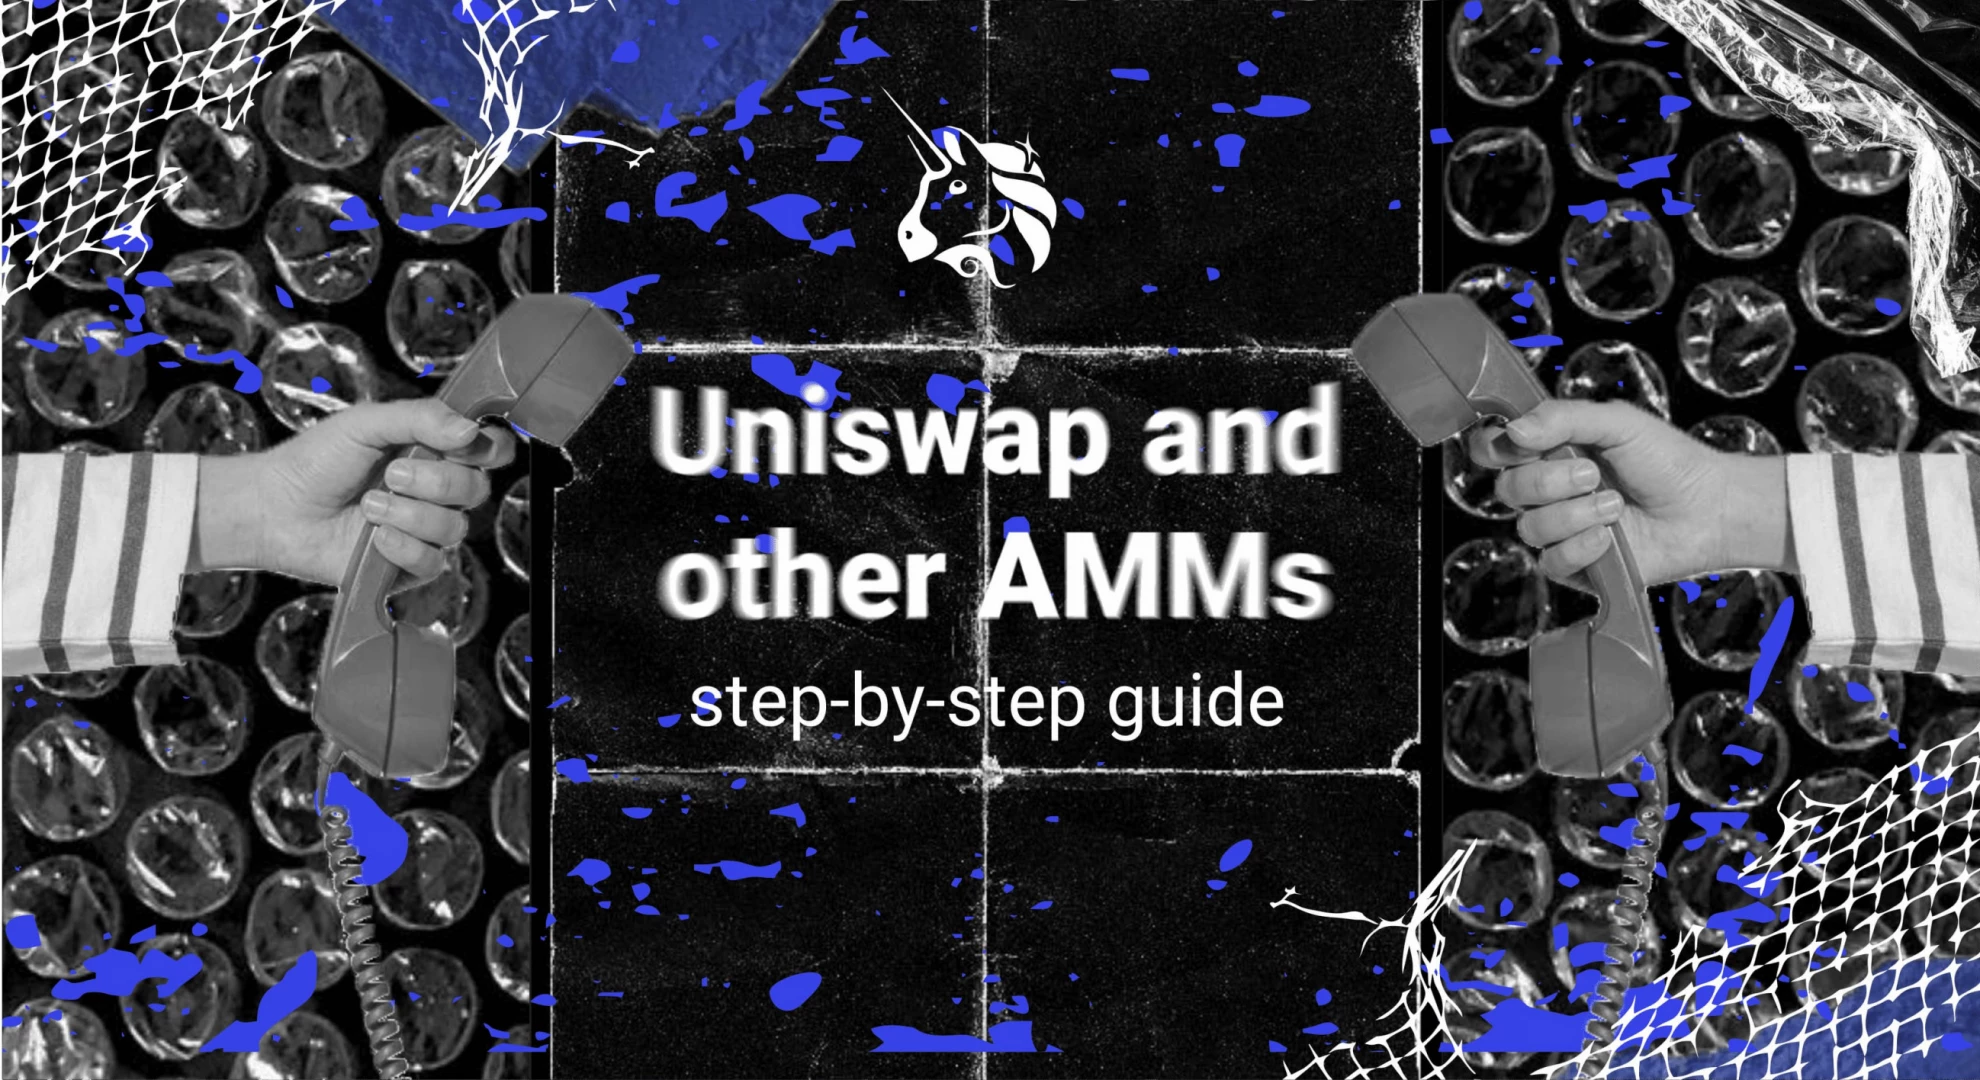 Uniswap and other AMMs